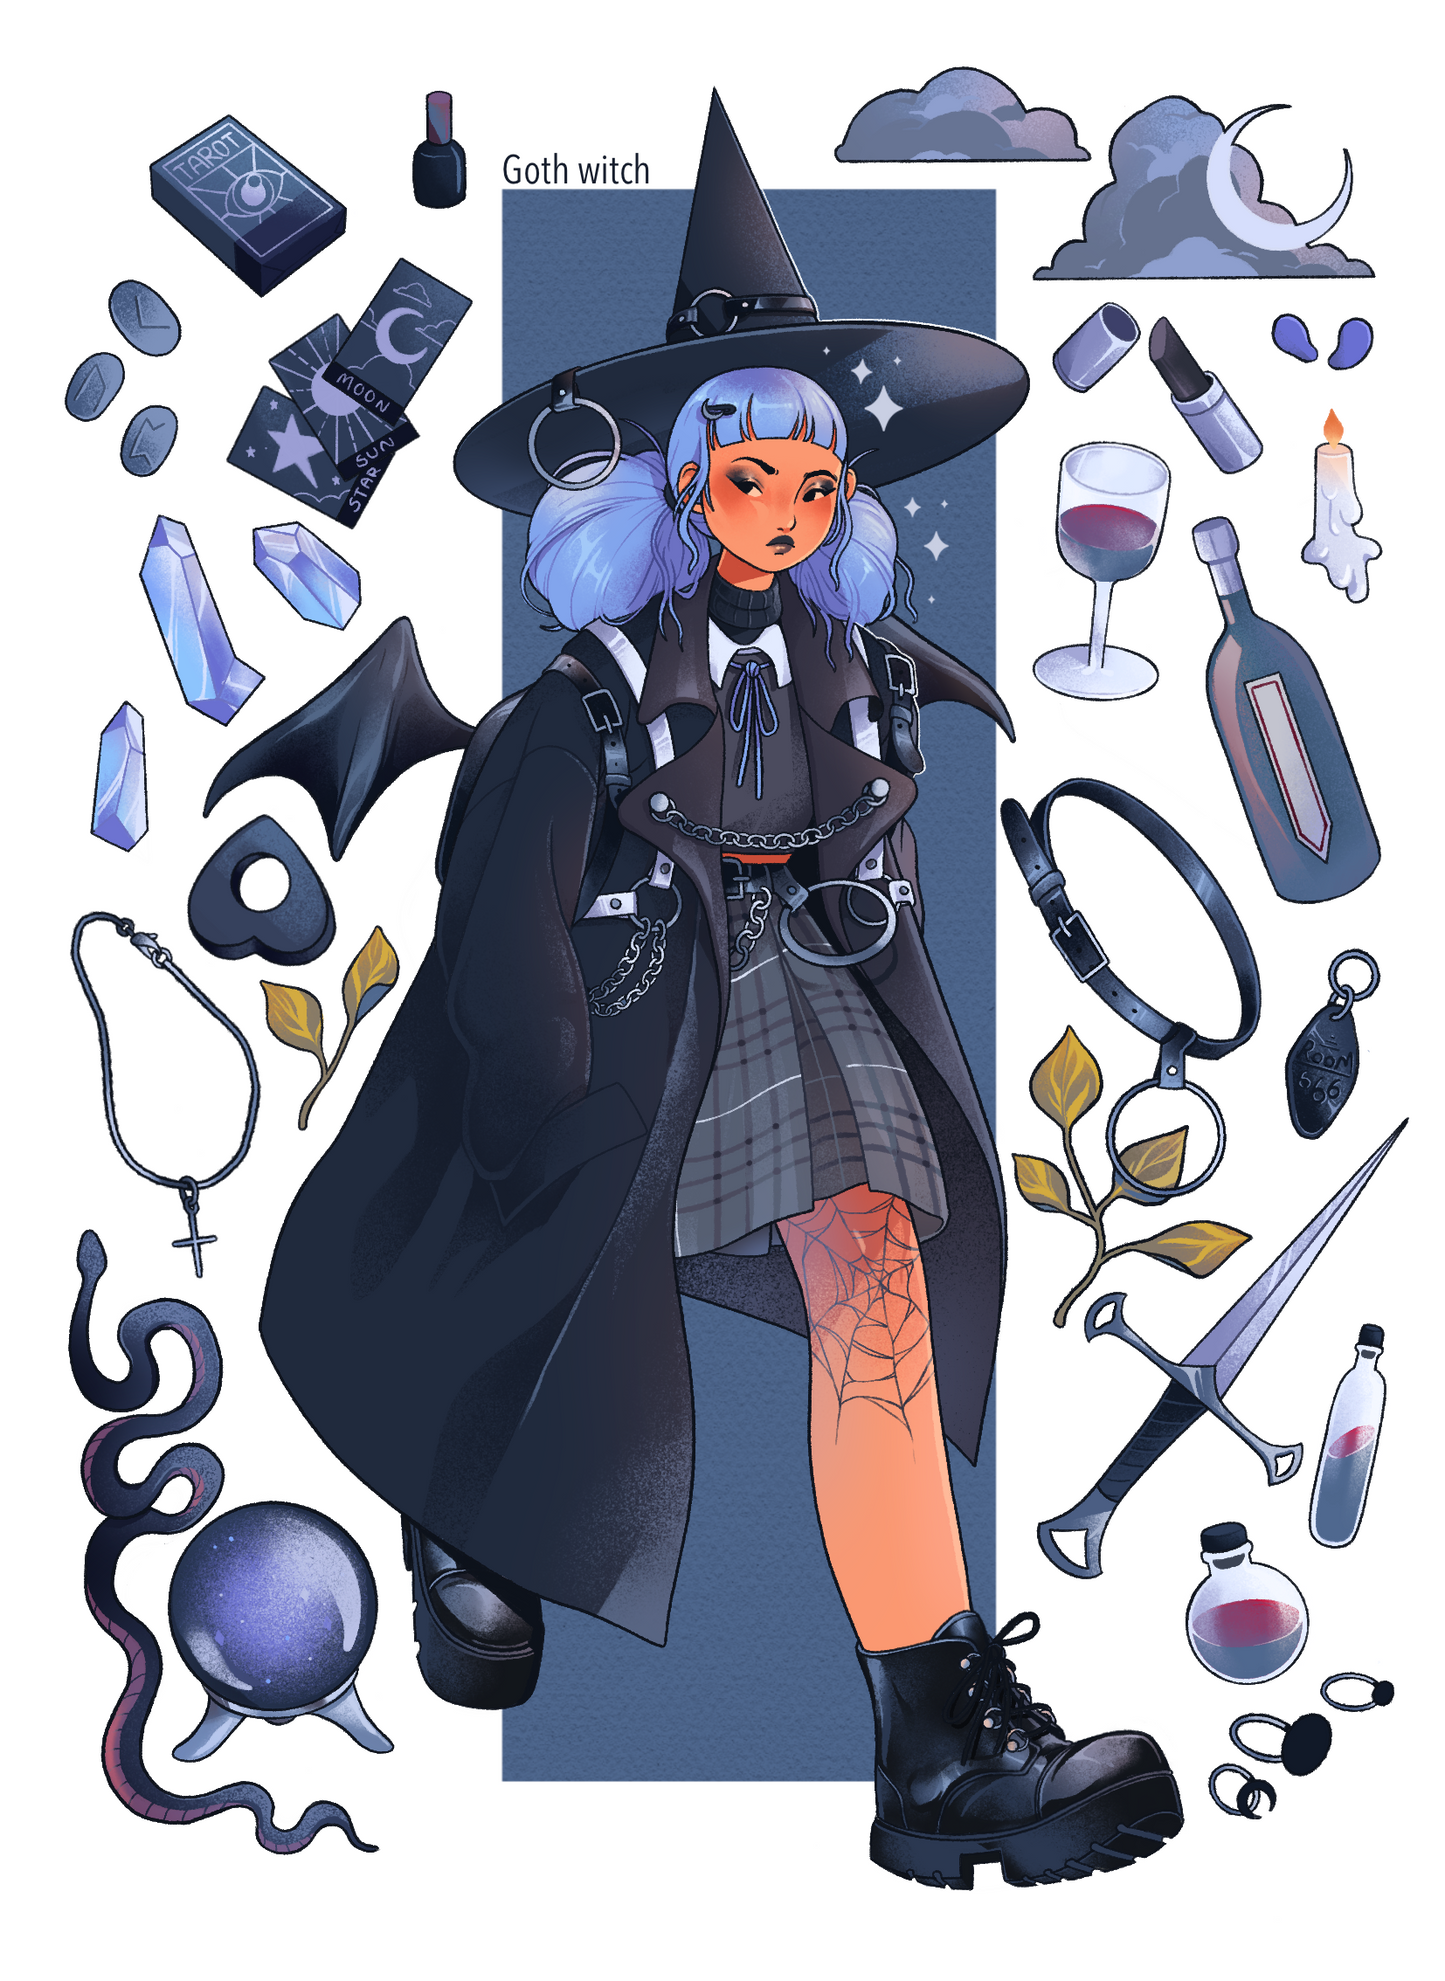 Fashion witches A5 print set ! - 1 or all 4